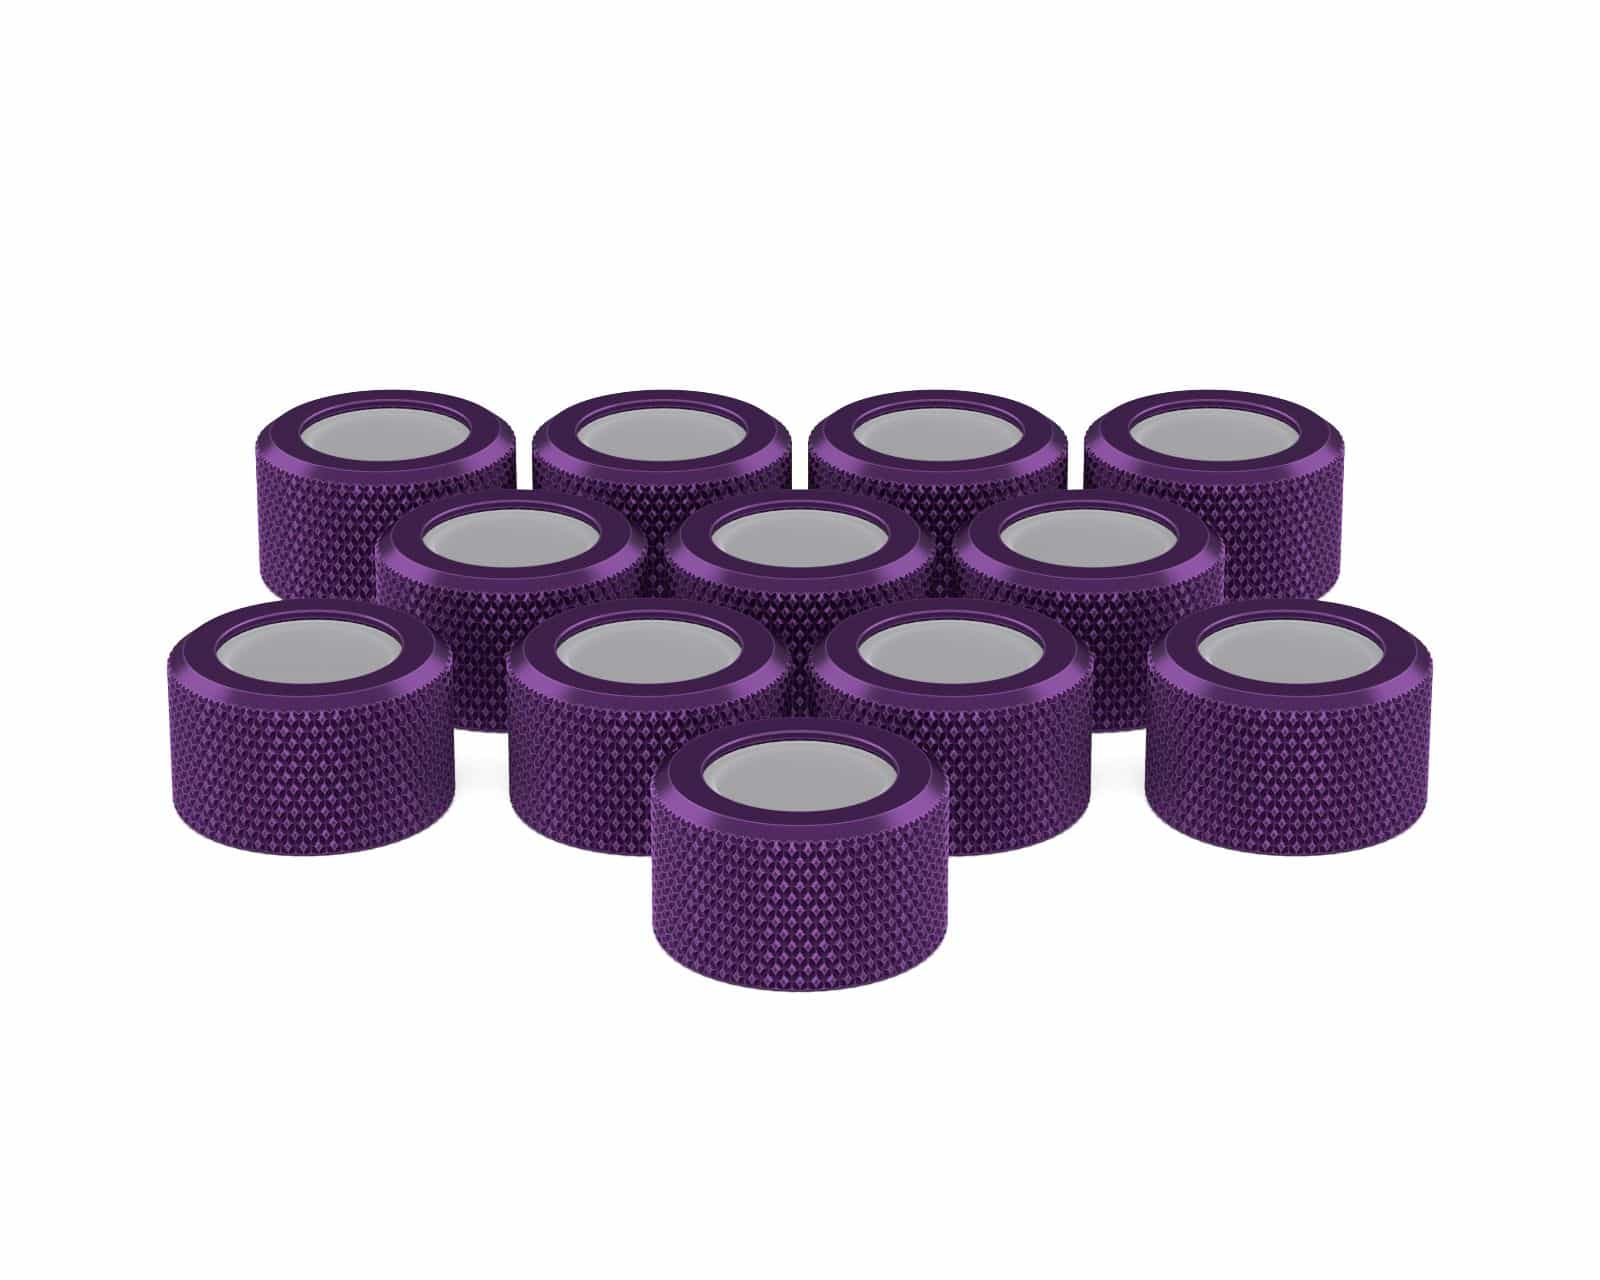 PrimoChill RMSX Replacement Cap Switch Over Kit - 16mm - PrimoChill - KEEPING IT COOL Candy Purple